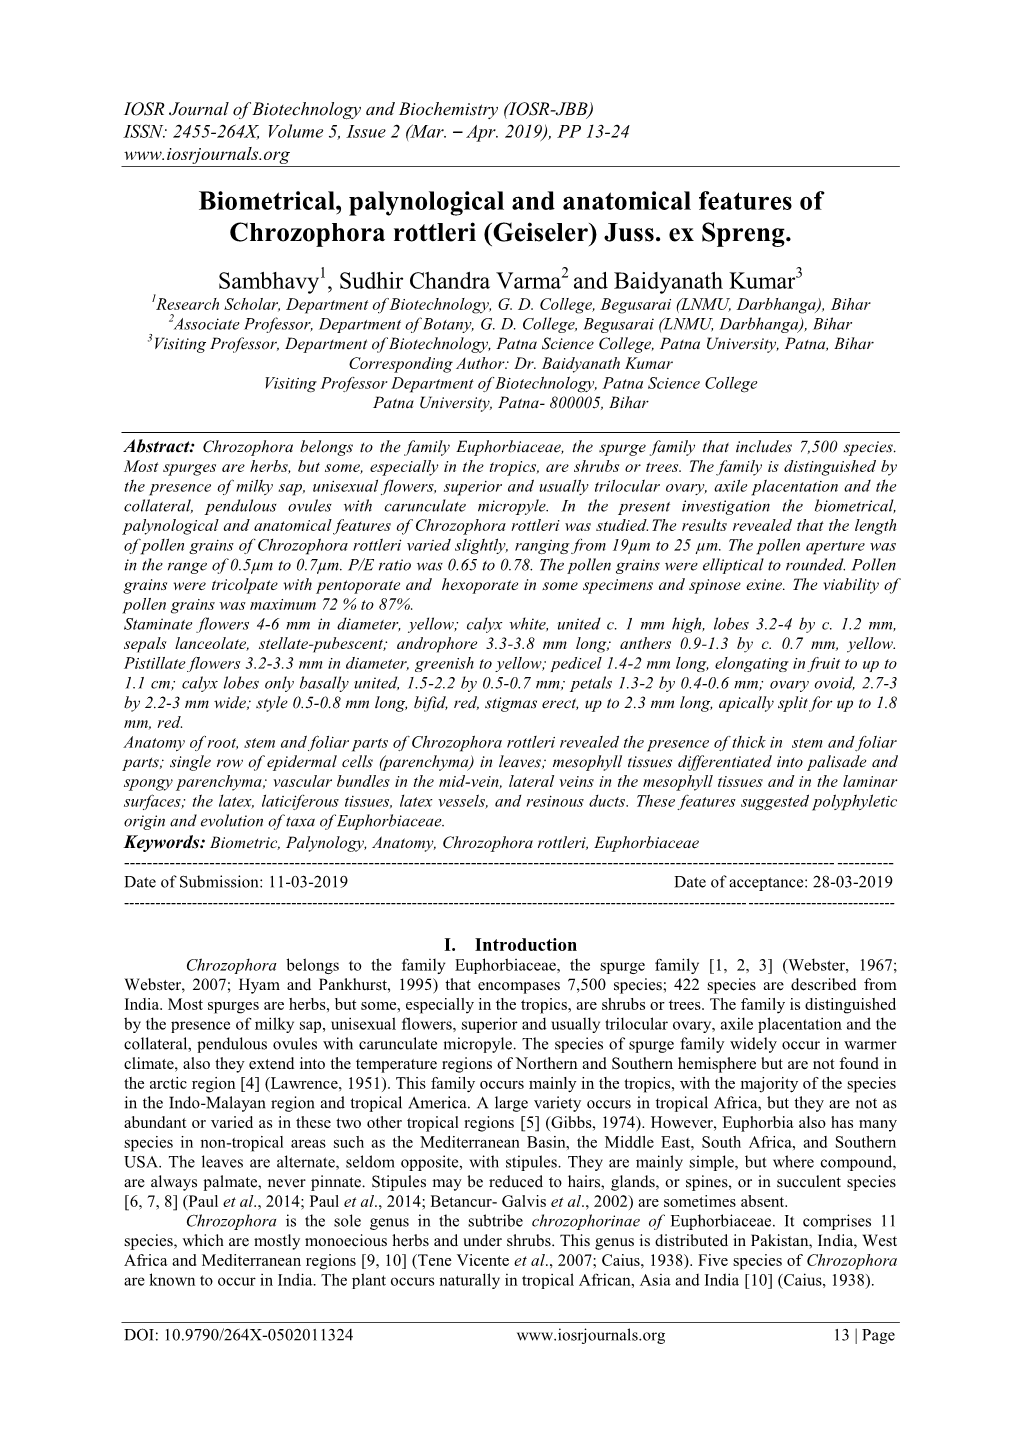 Biometrical, Palynological and Anatomical Features of Chrozophora Rottleri (Geiseler) Juss